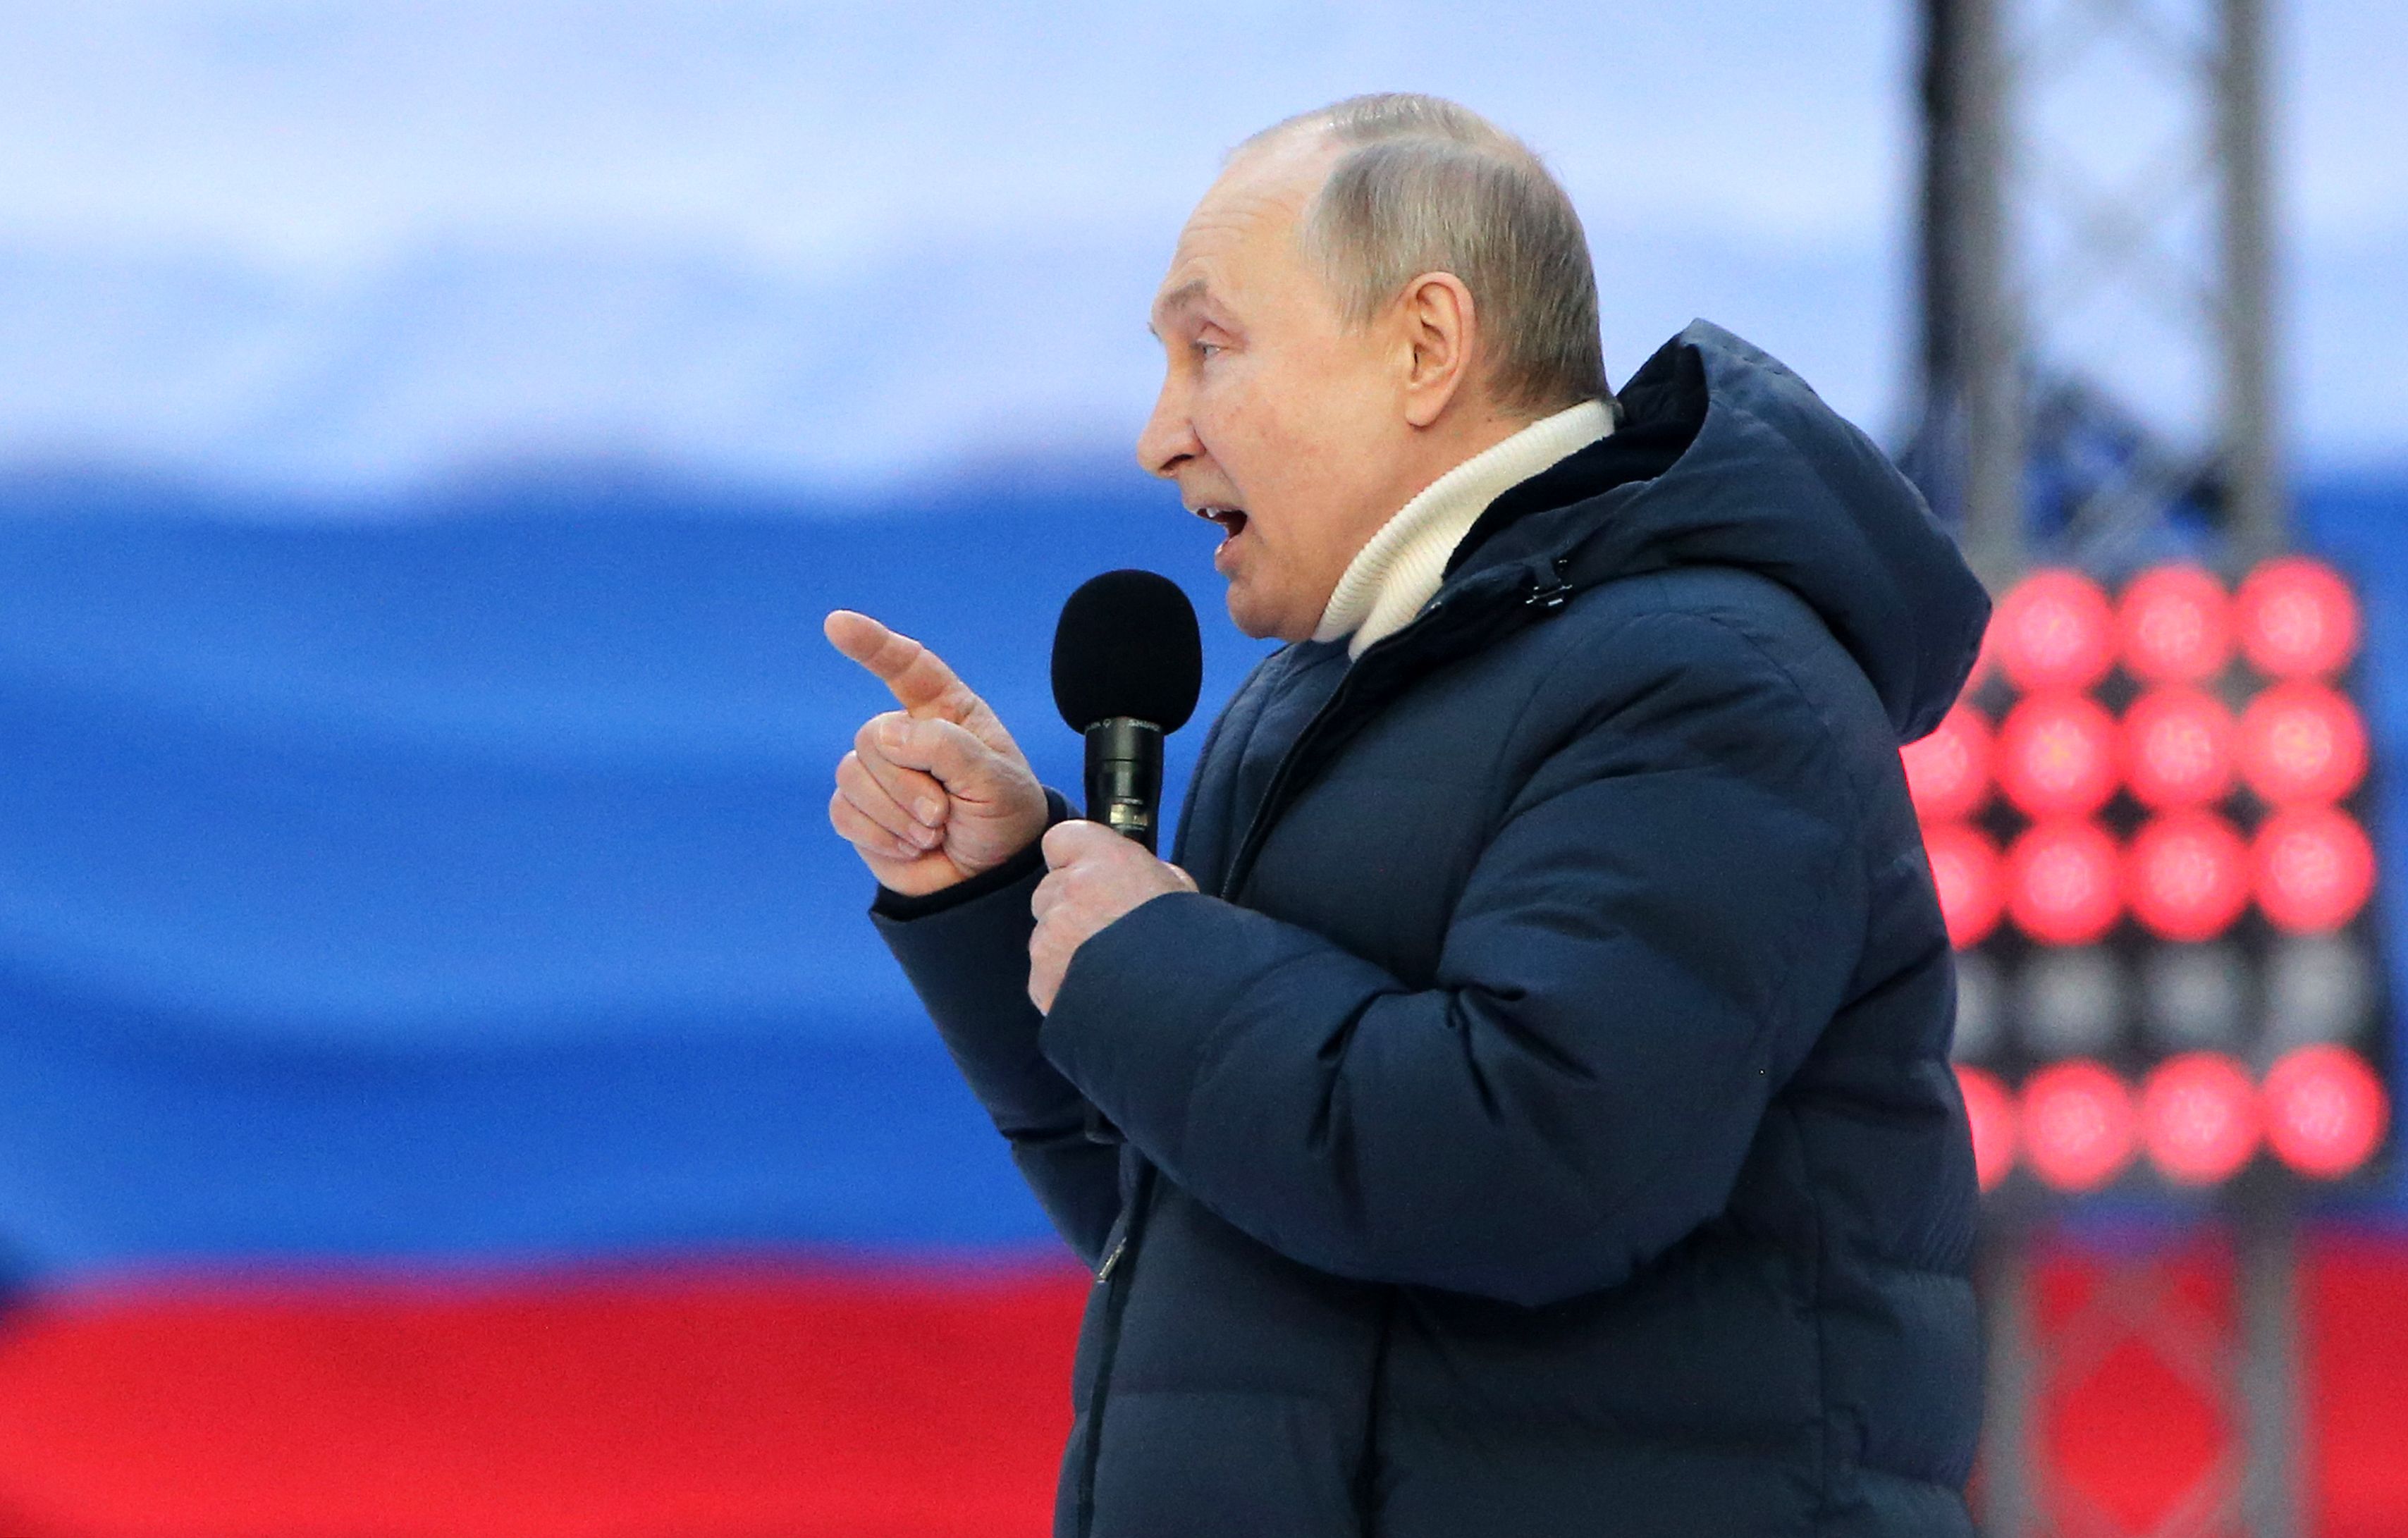 Russian President Vladimir Putin speaks during a concert marking the anniversary of the annexation of Crimea, on March 18, 2022 in Moscow, Russia. 